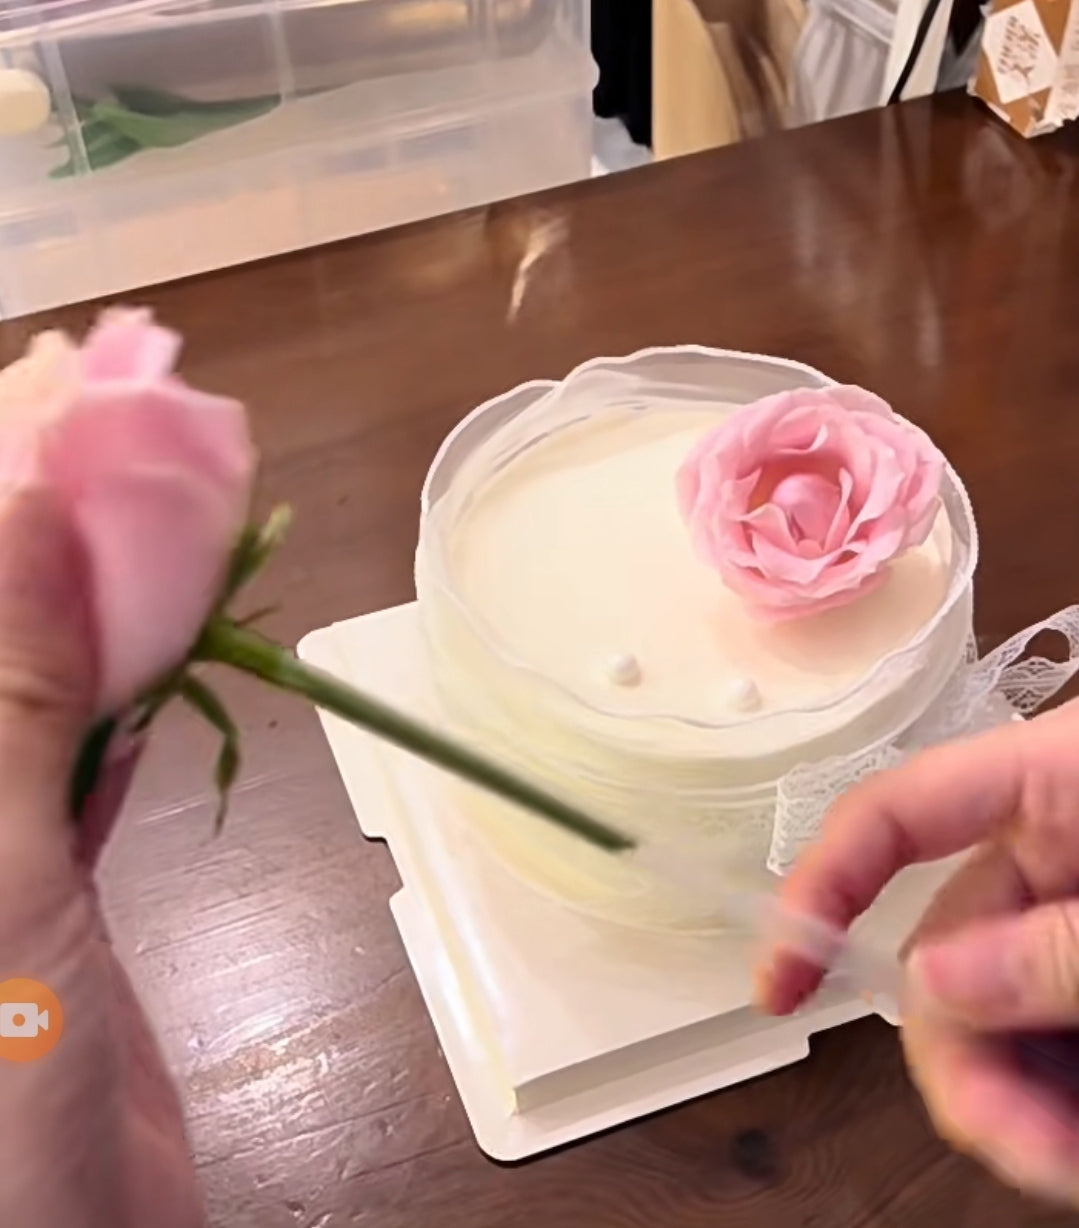 How to decorate your cake with fresh flowers